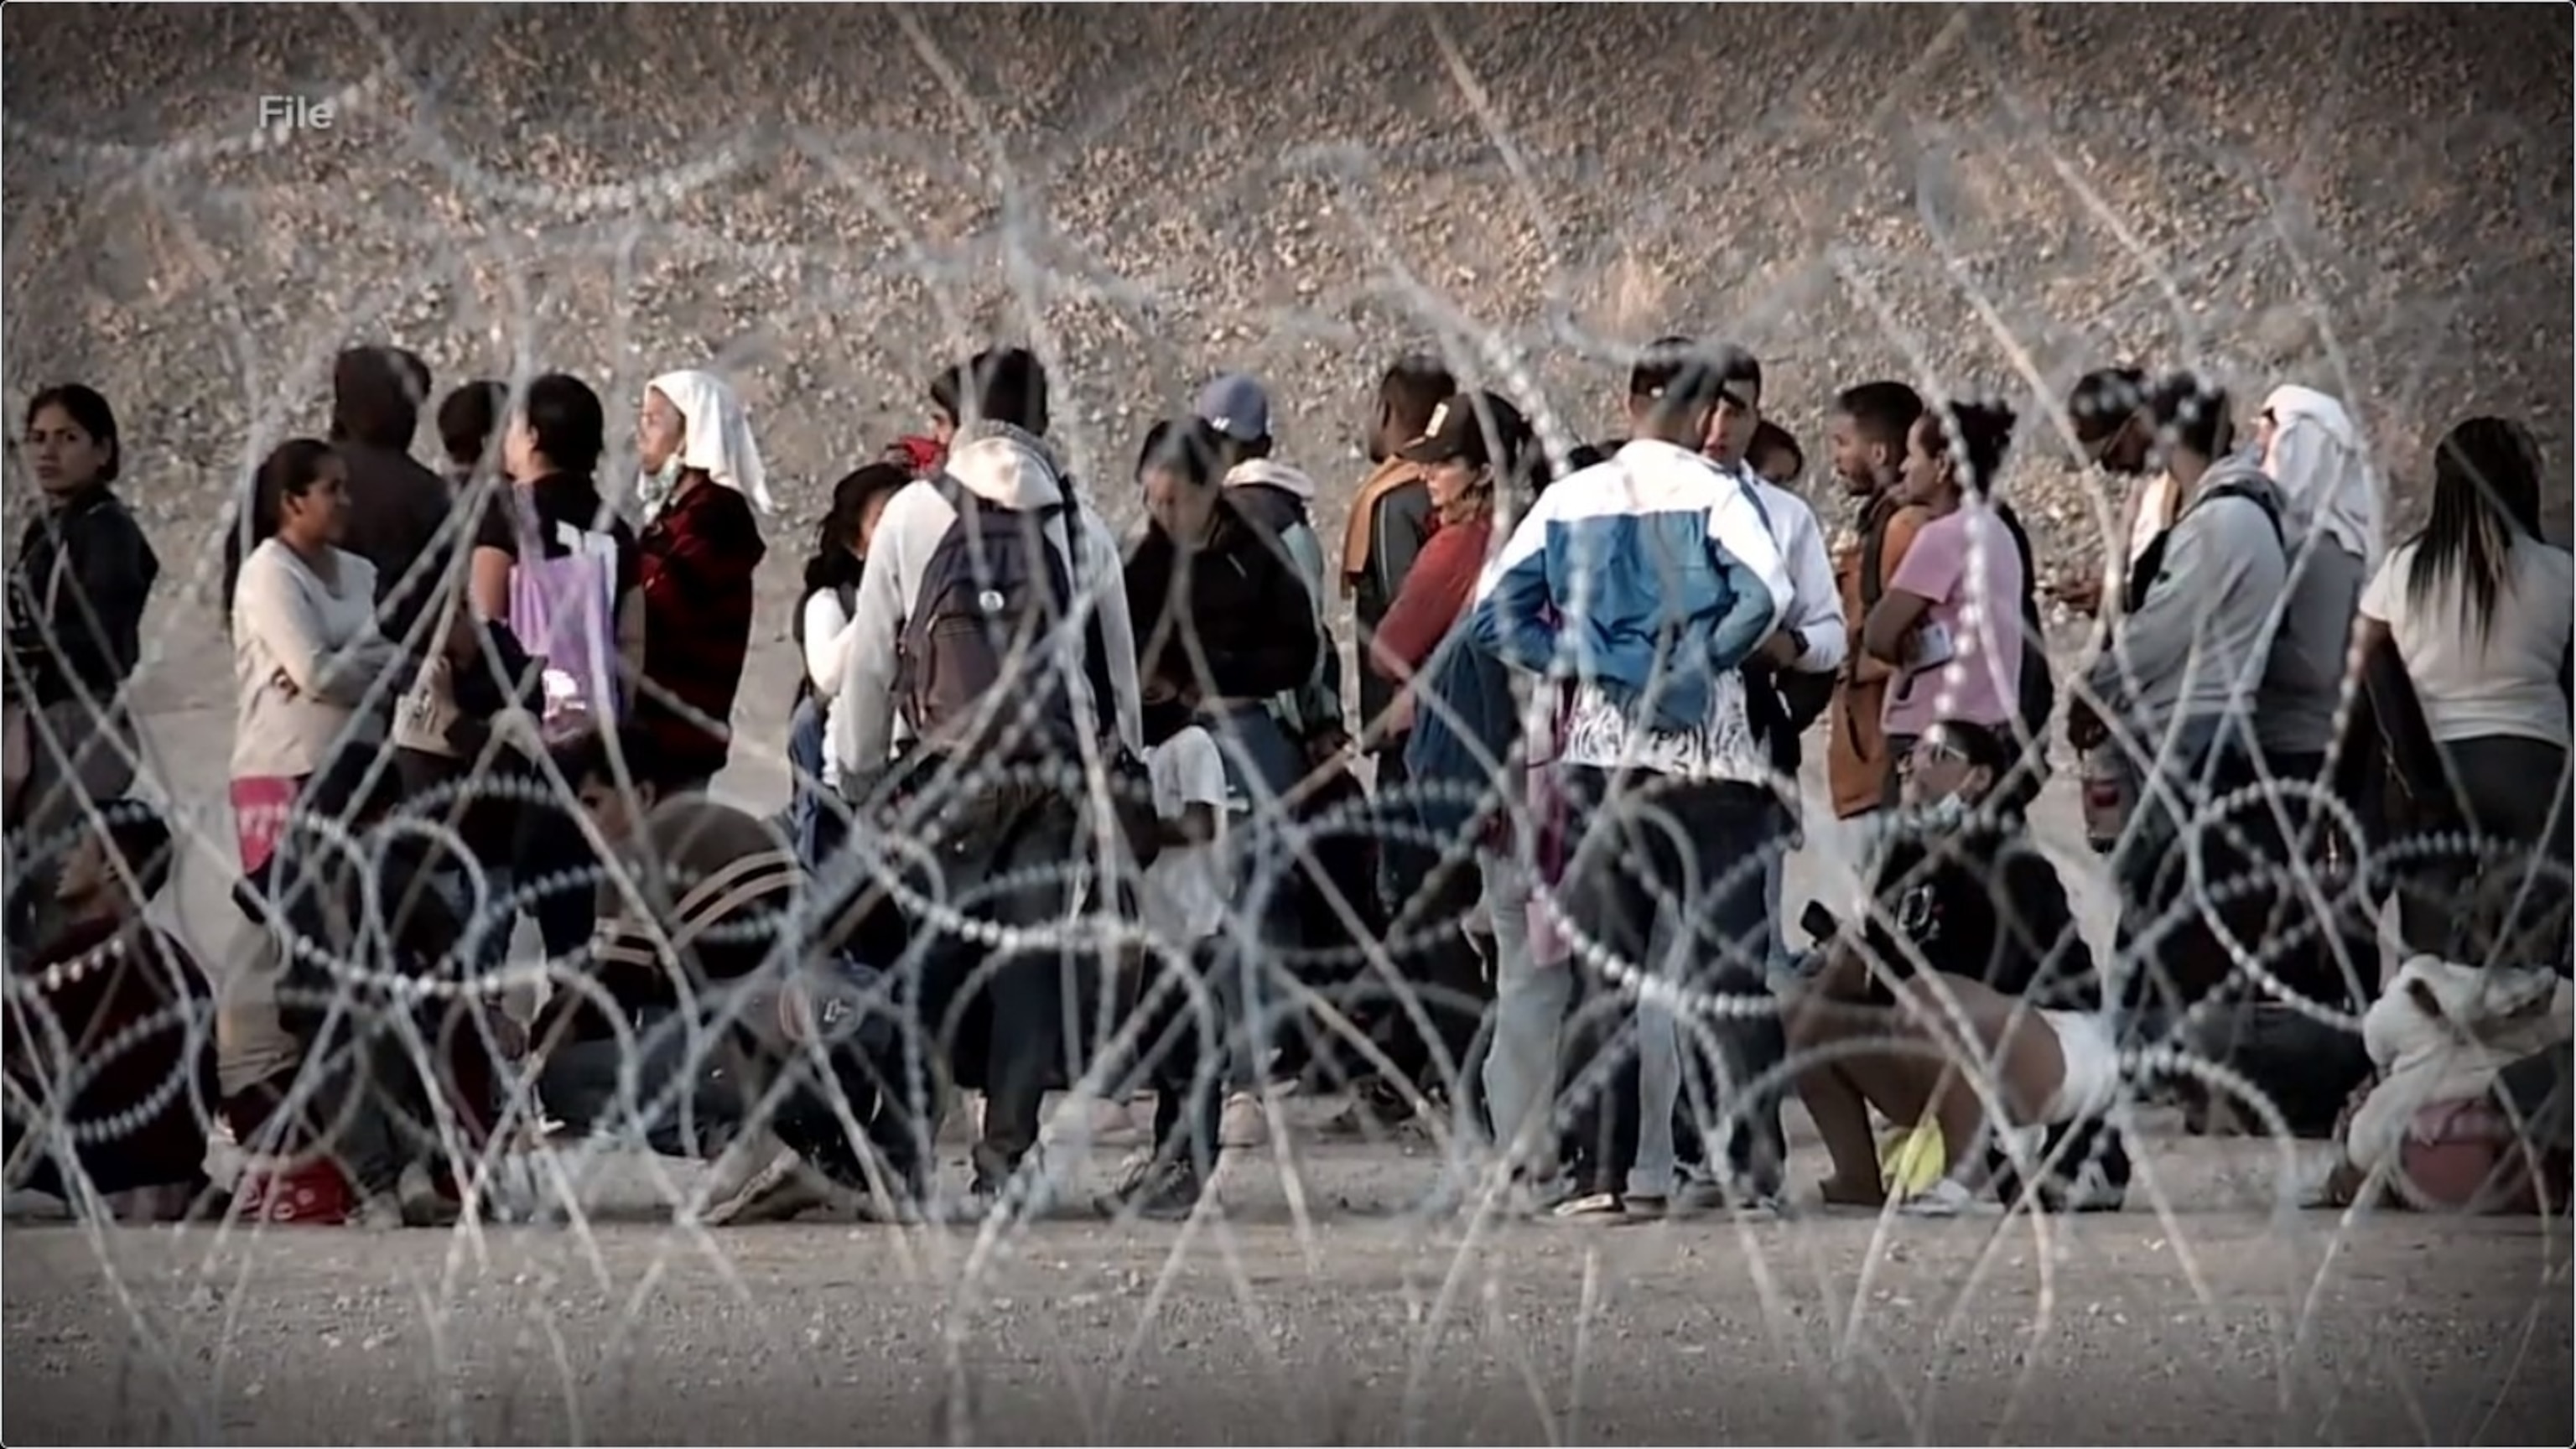 PHOTO: Thousands of South American migrants cross a border.